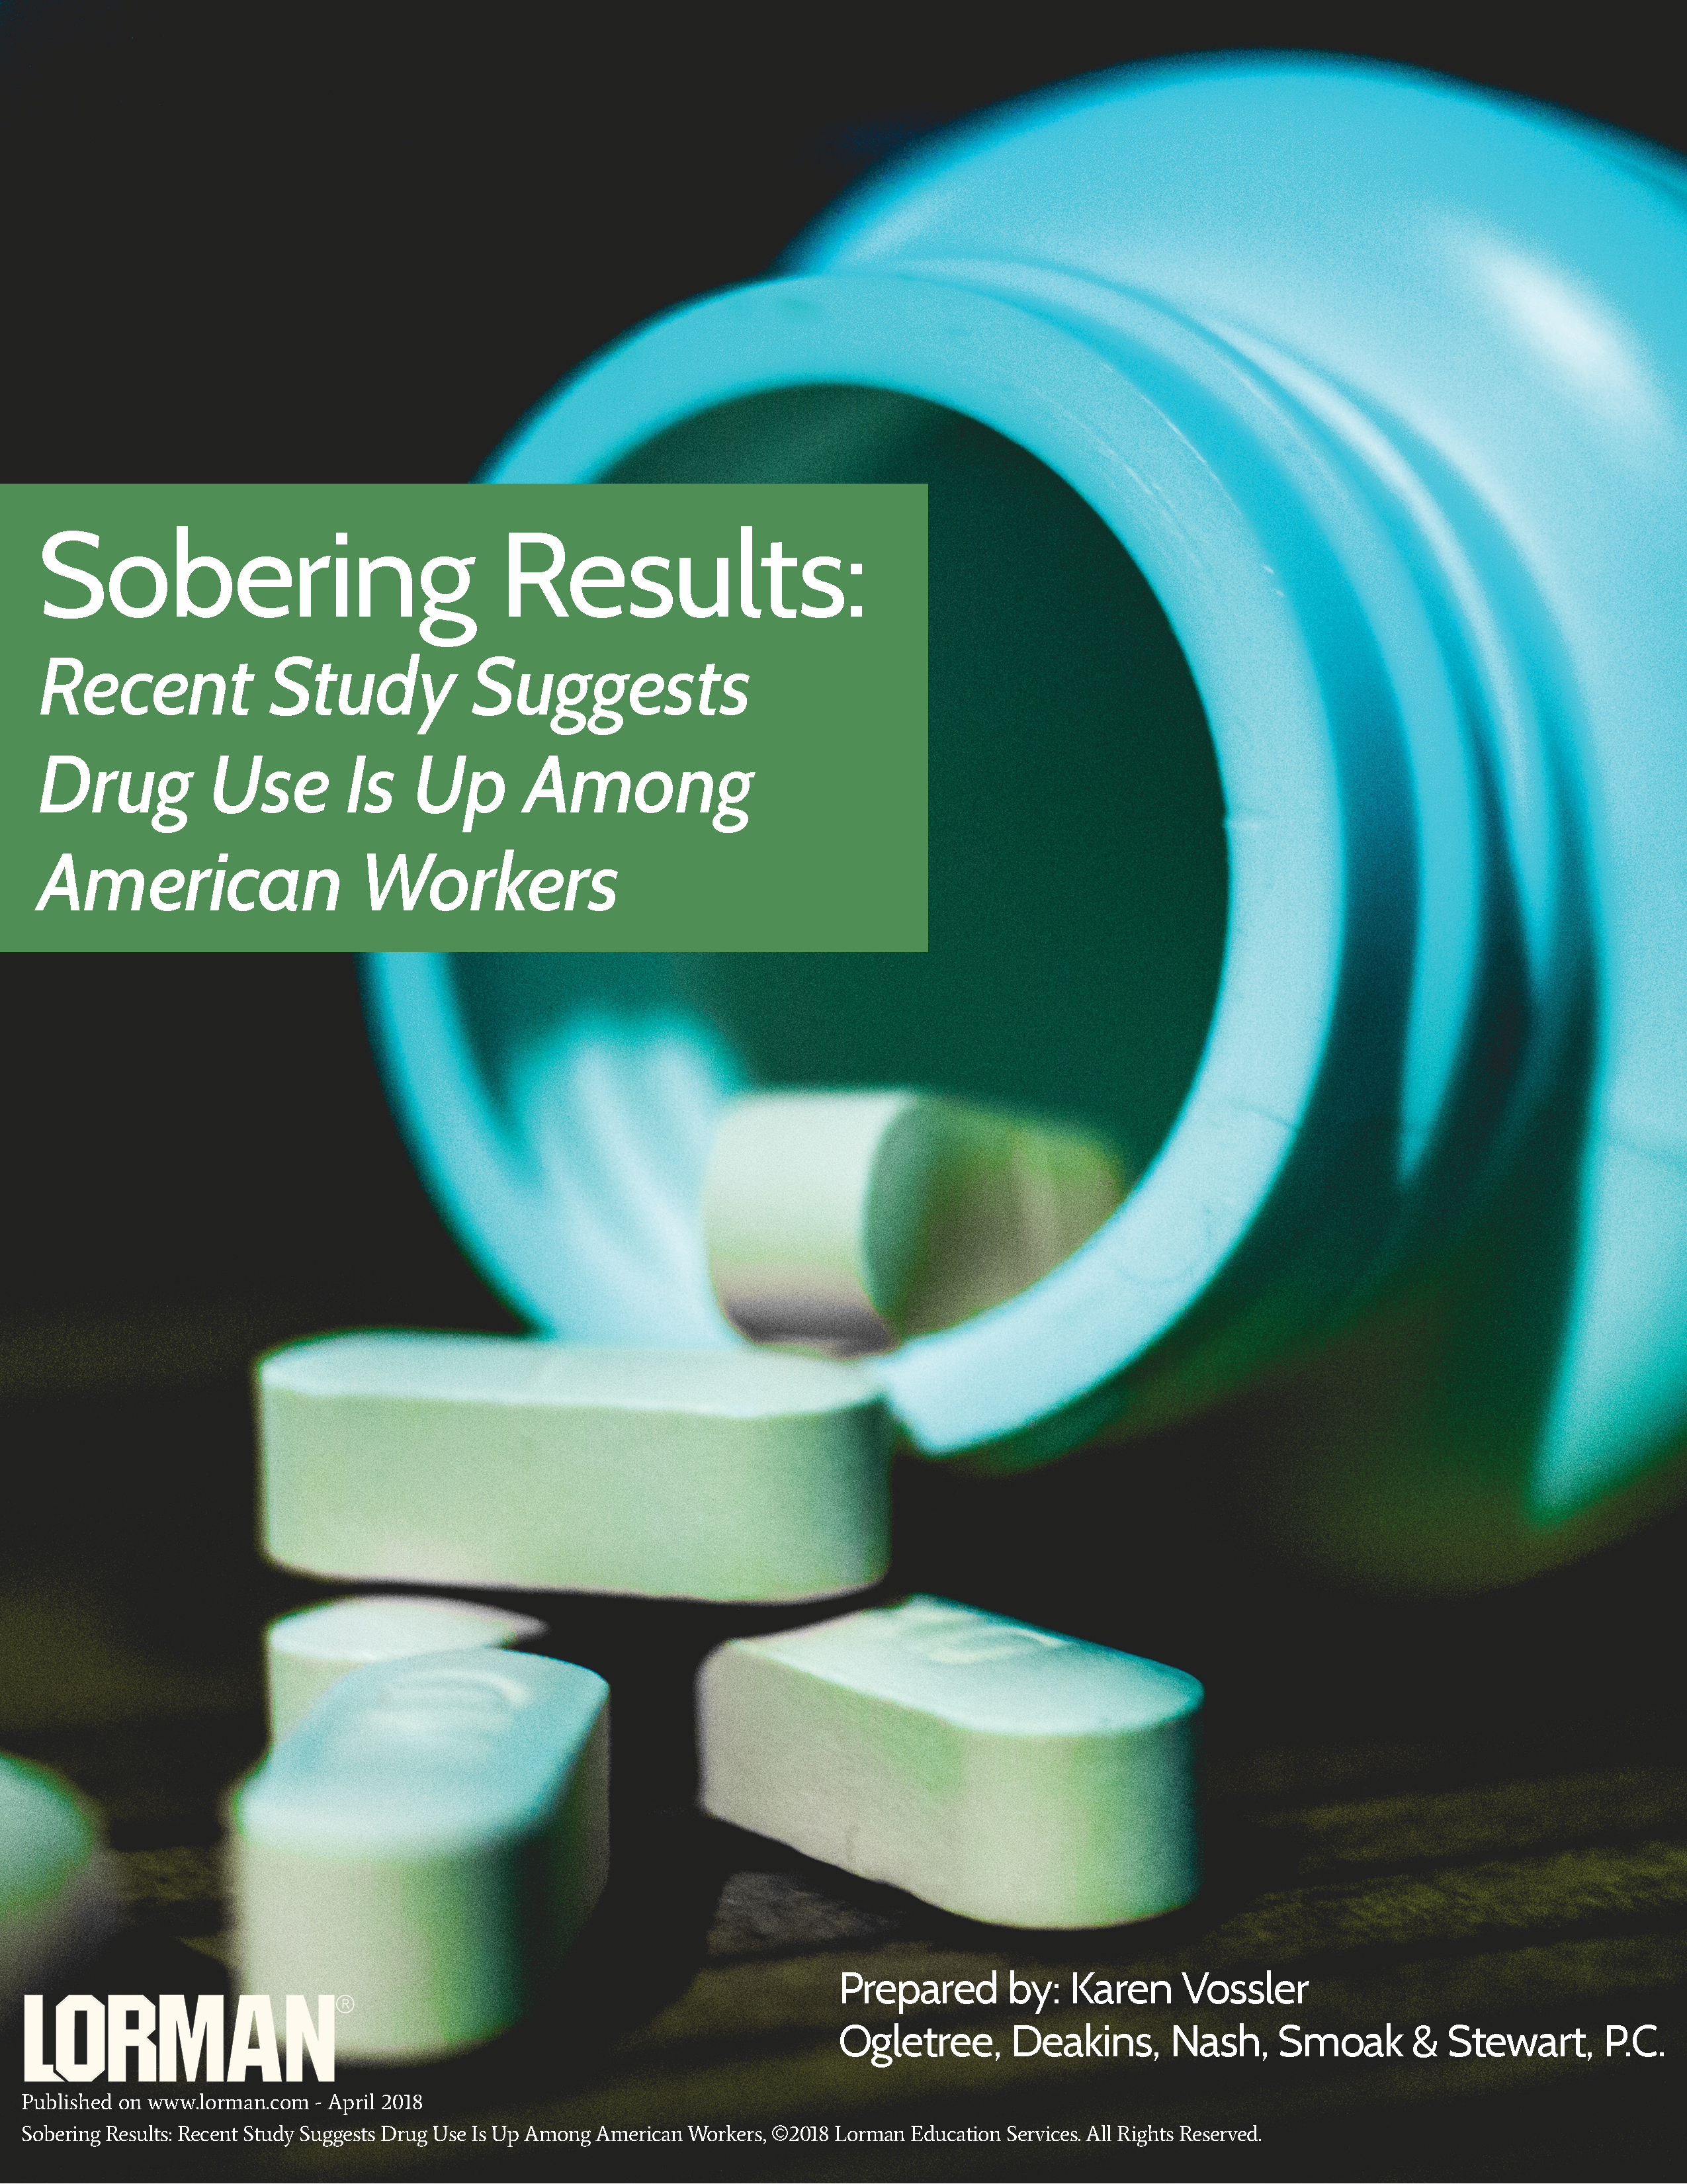 Sobering Results: Recent Study Suggests Drug Use Is Up Among American Workers